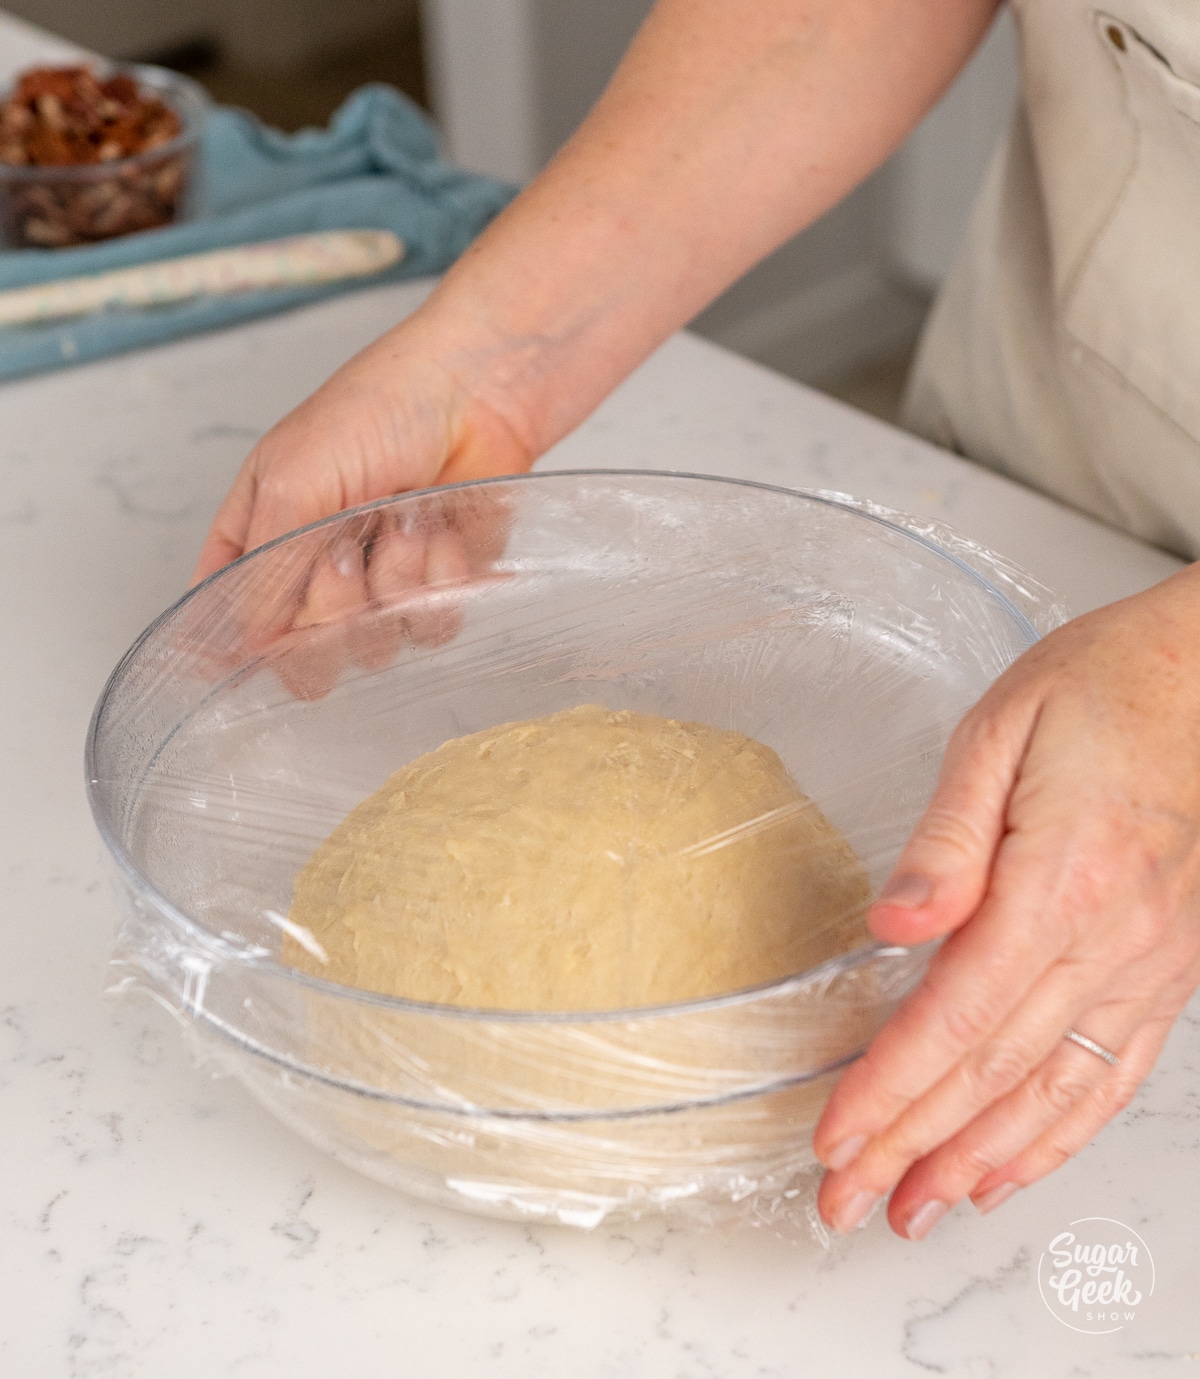 hands covering a ball of dough in a glass bowl with plastic wrap